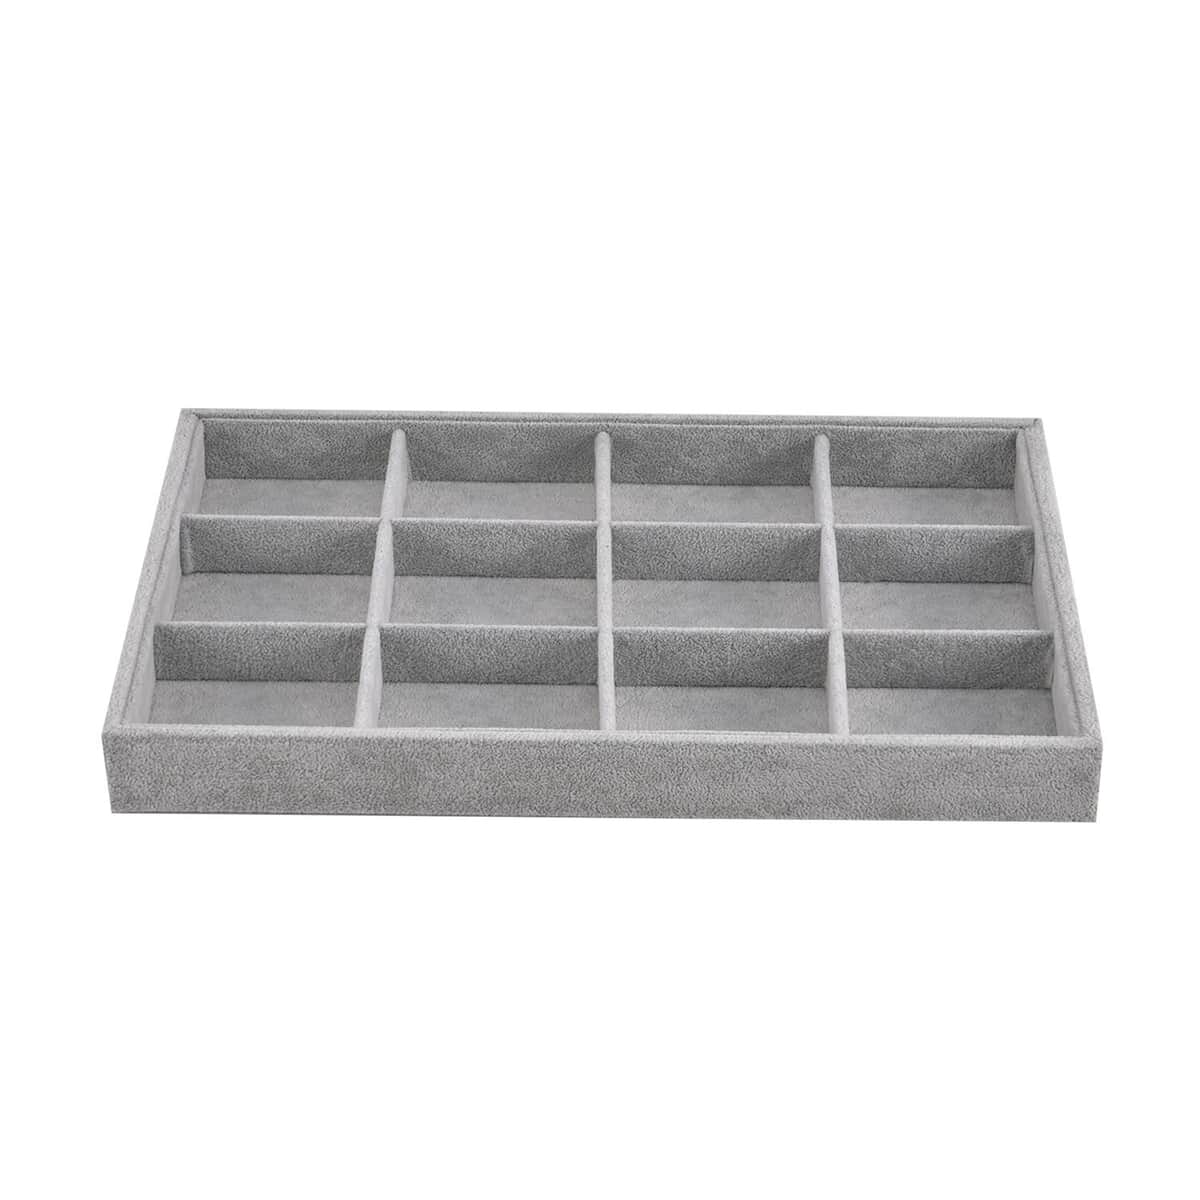 Gray Ice Velvet Removeable 12 Section Jewelry Tray (13.8"x9.4"x1.2") image number 6